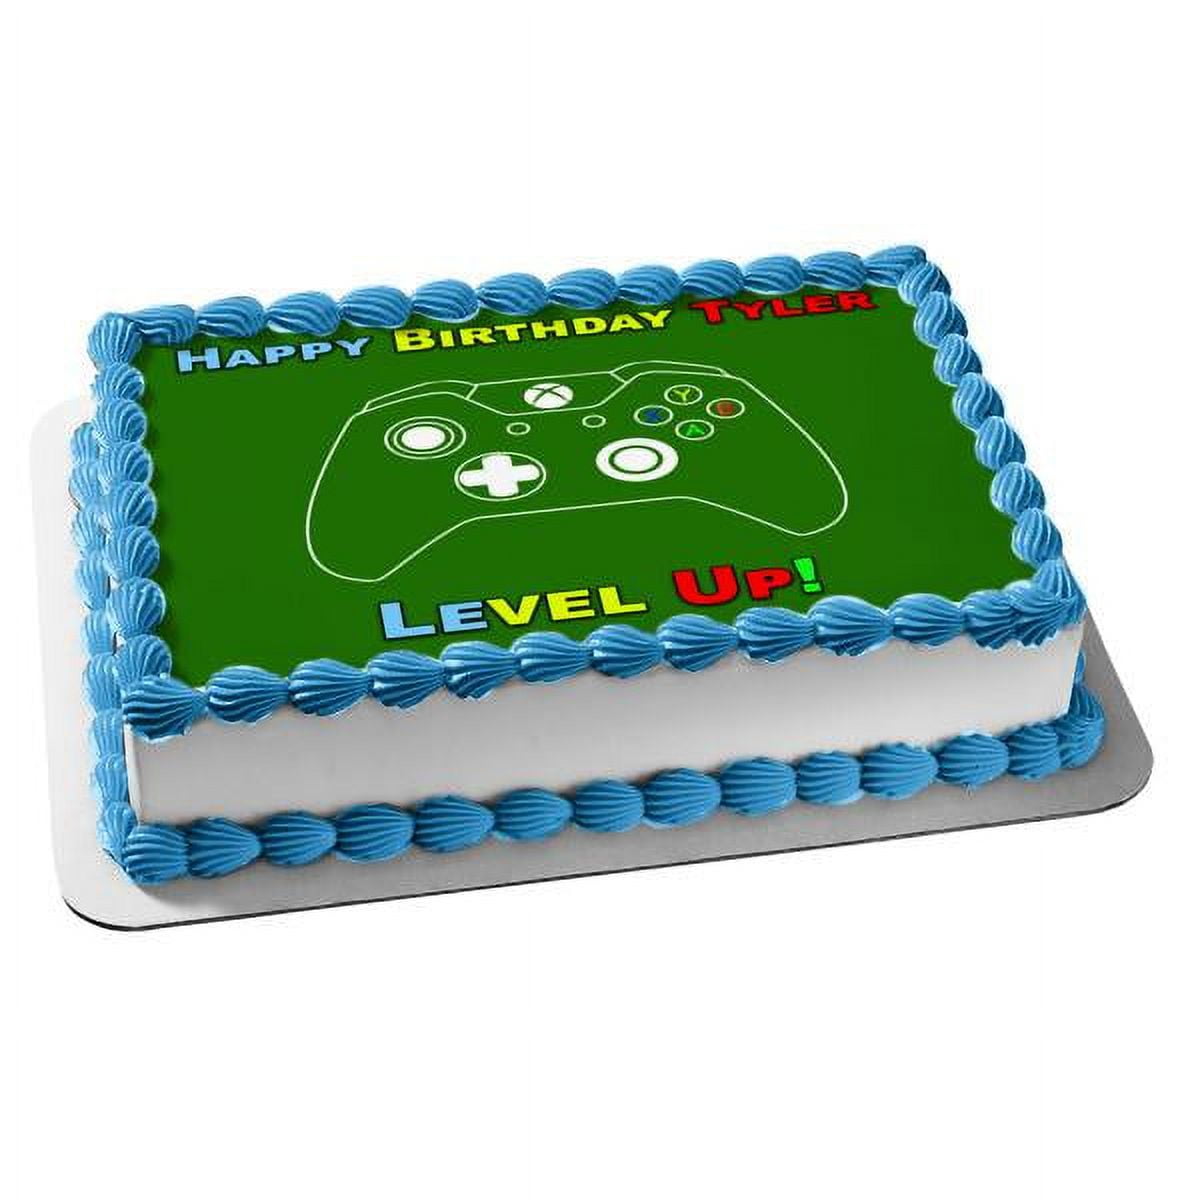 The cake is not a lie: Asda and Tesco to stock the official Xbox Controller  cake | TheSixthAxis